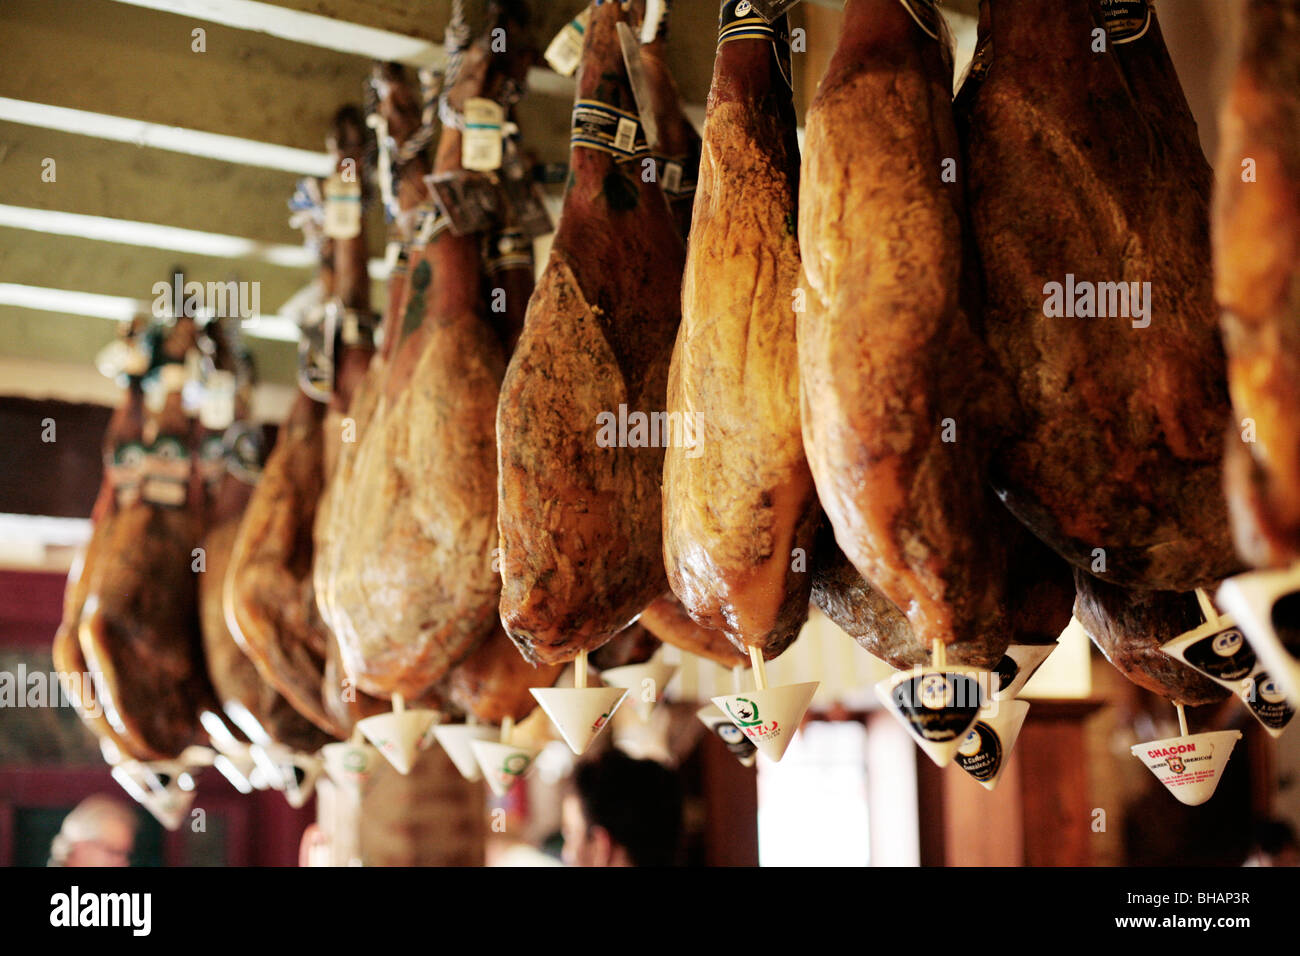 'Jamon Iberico' - Iberian Ham from Acorn fed pigs hanging in a cafe in Seville, Spain. Stock Photo